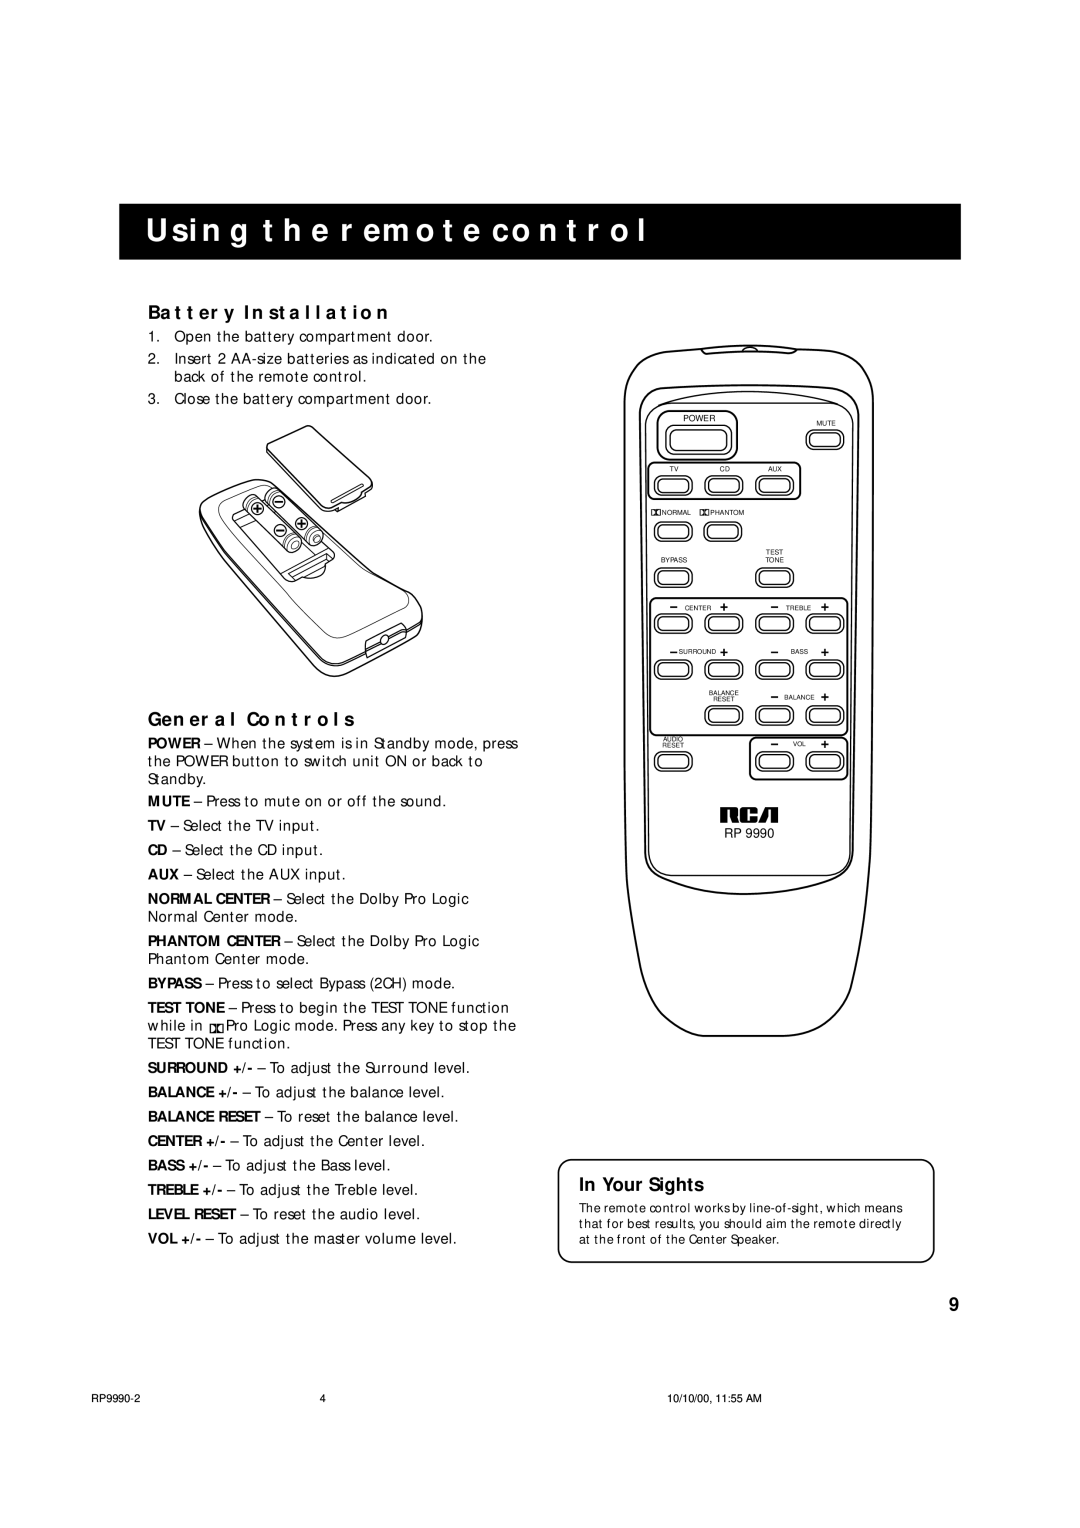 RCA RP-9990 manual Using The Remote Control, Battery Installation, General Controls, In Your Sights 